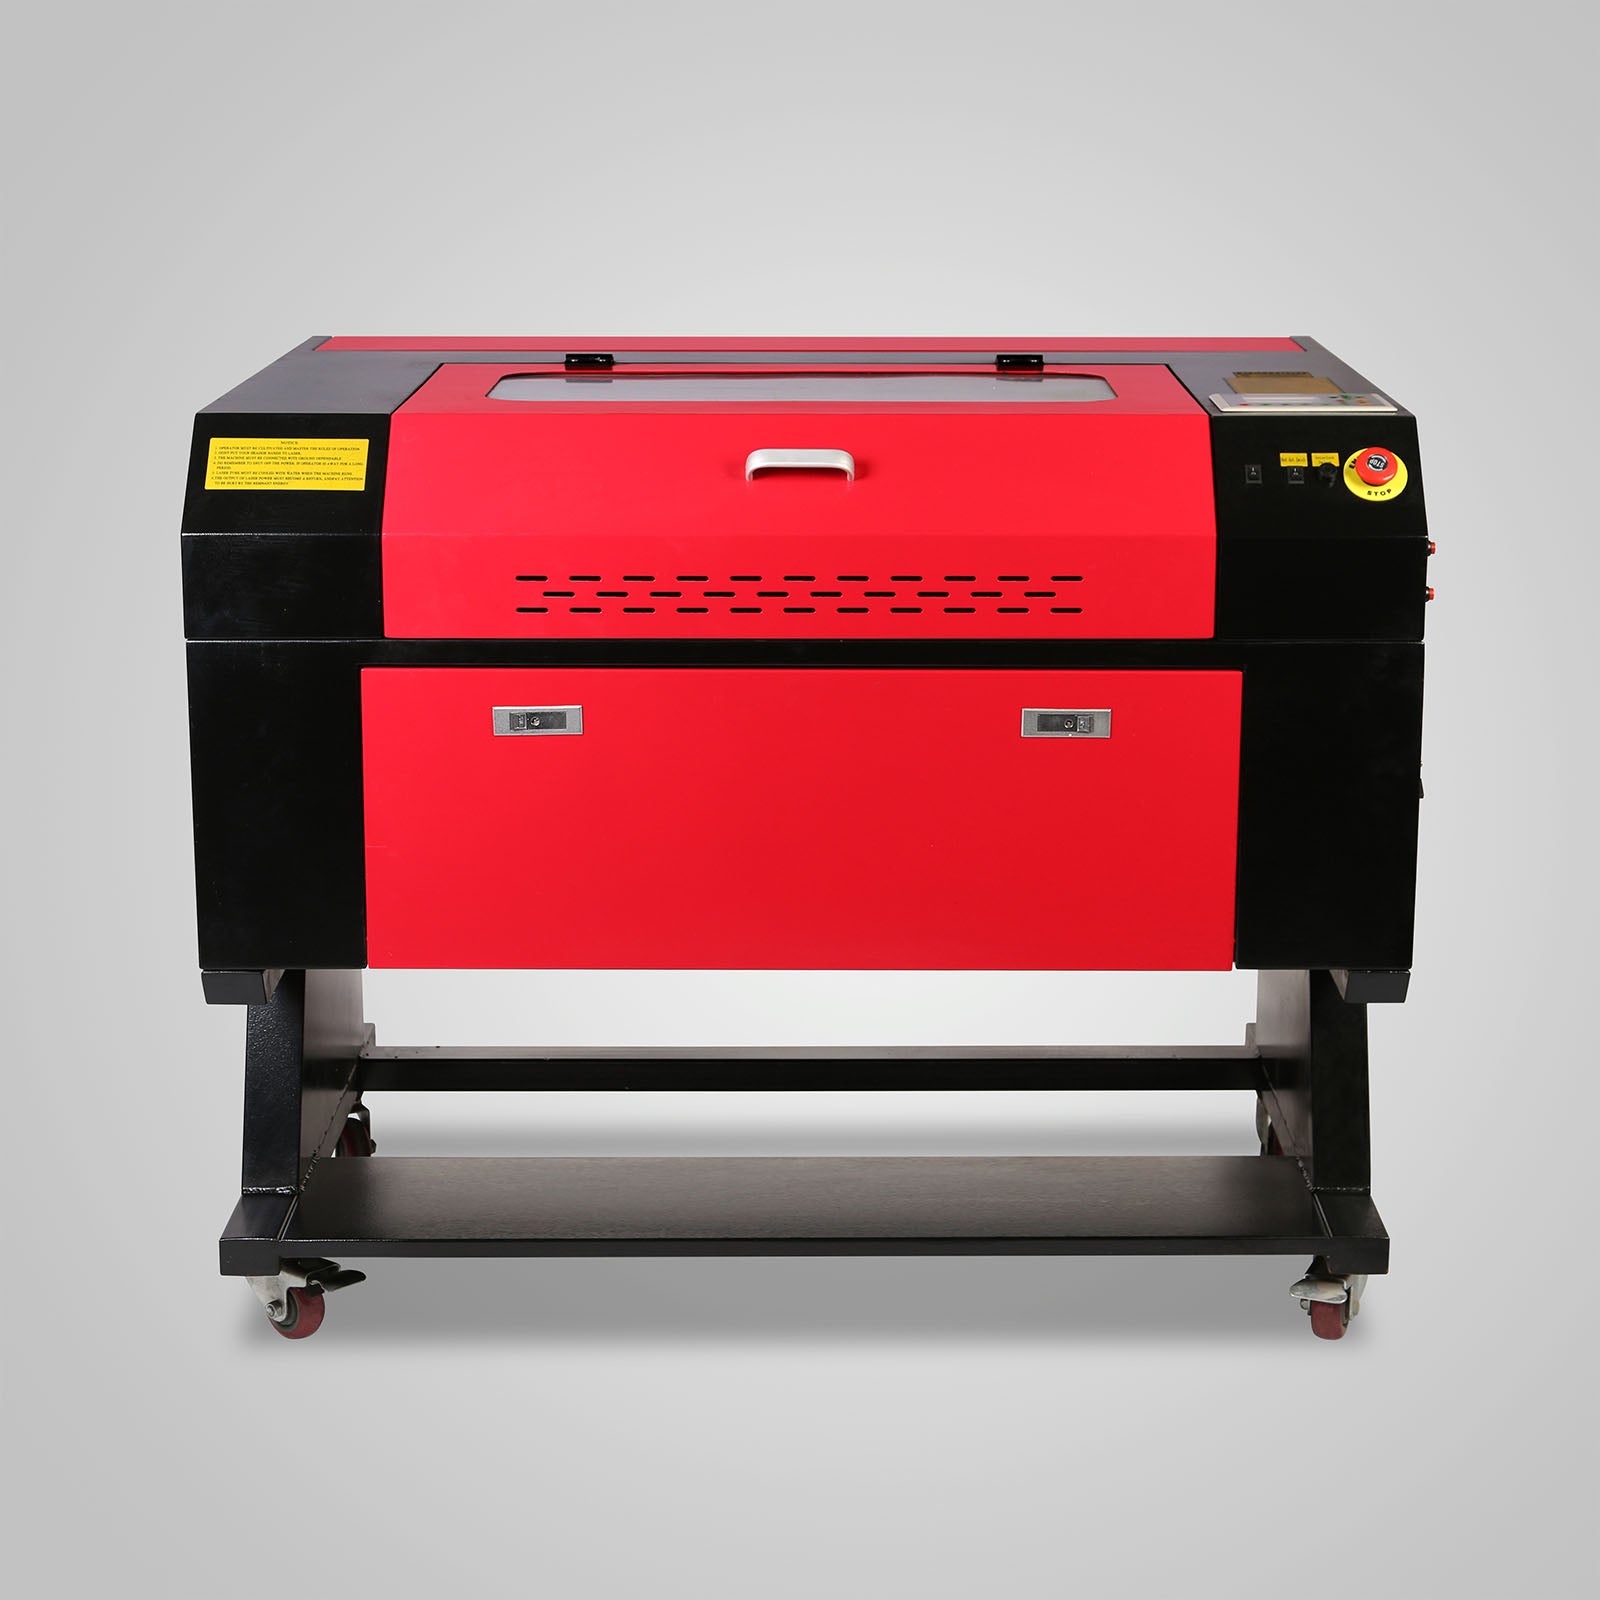 How to Choose the Right Laser Engraver for Your Business